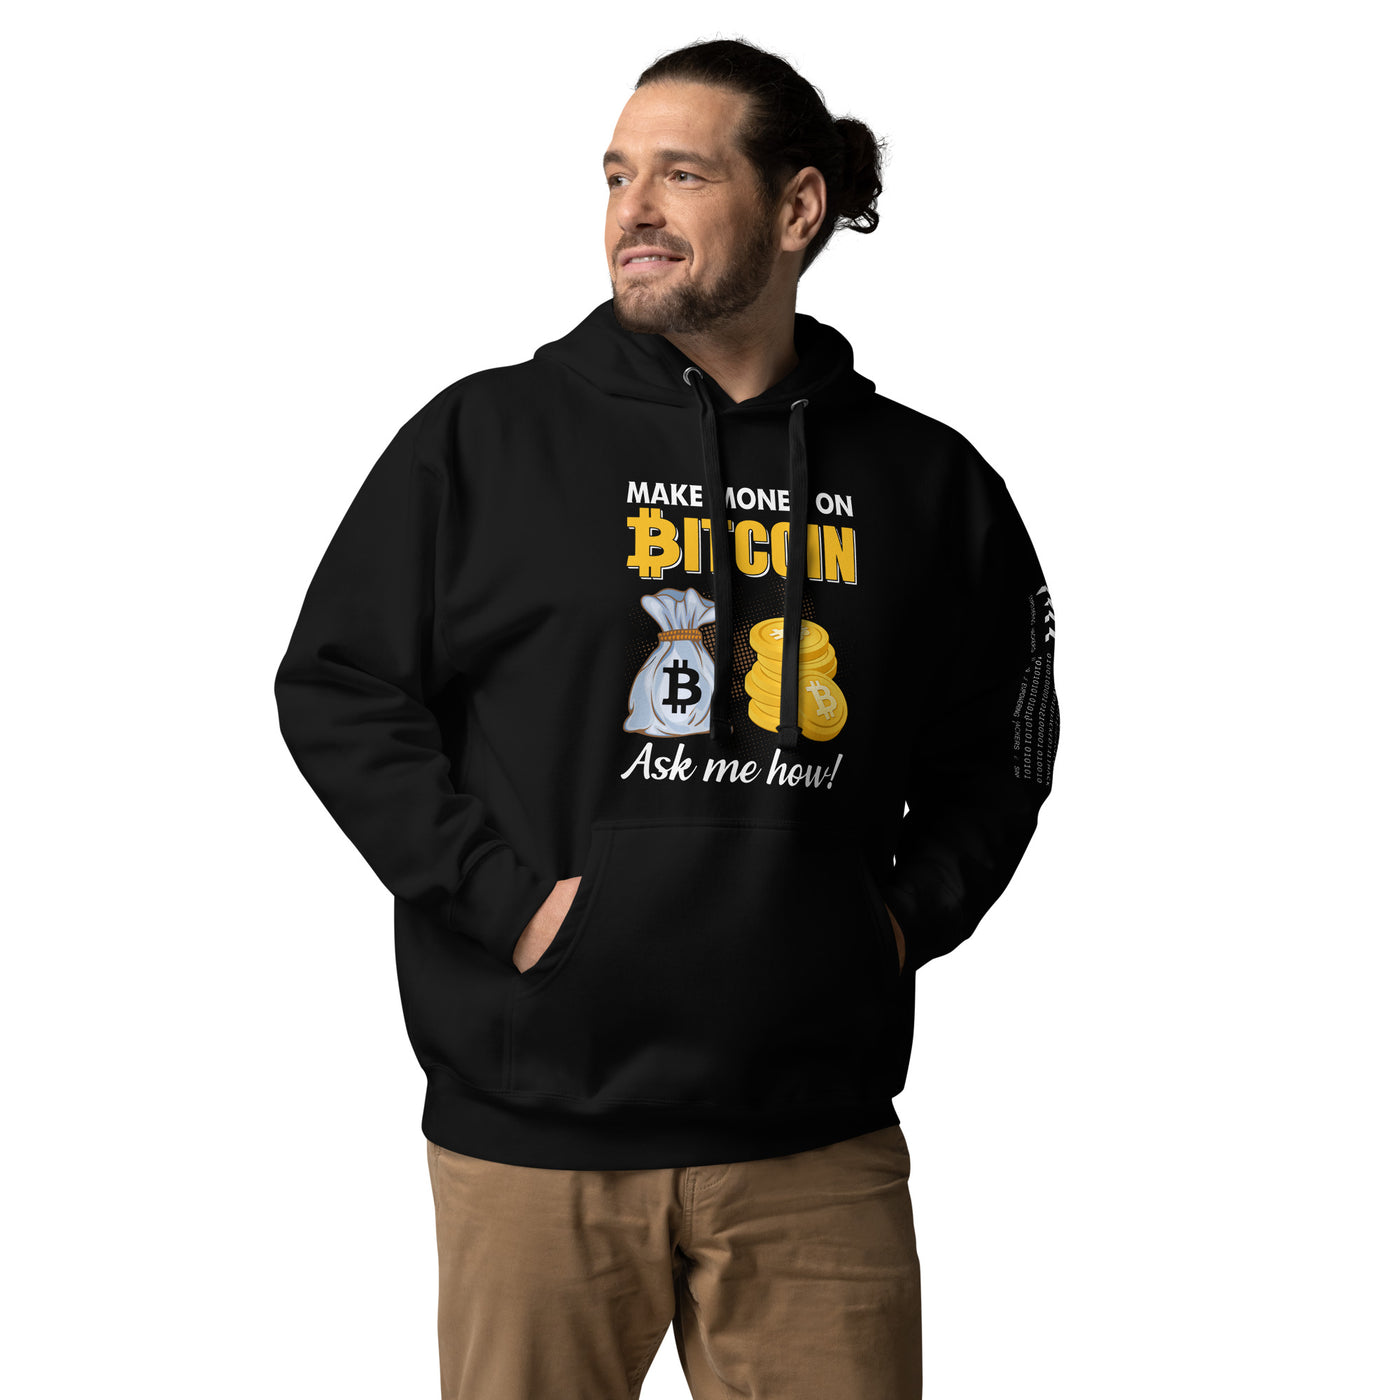 Make money on Bitcoin, Ask me how - Unisex Hoodie